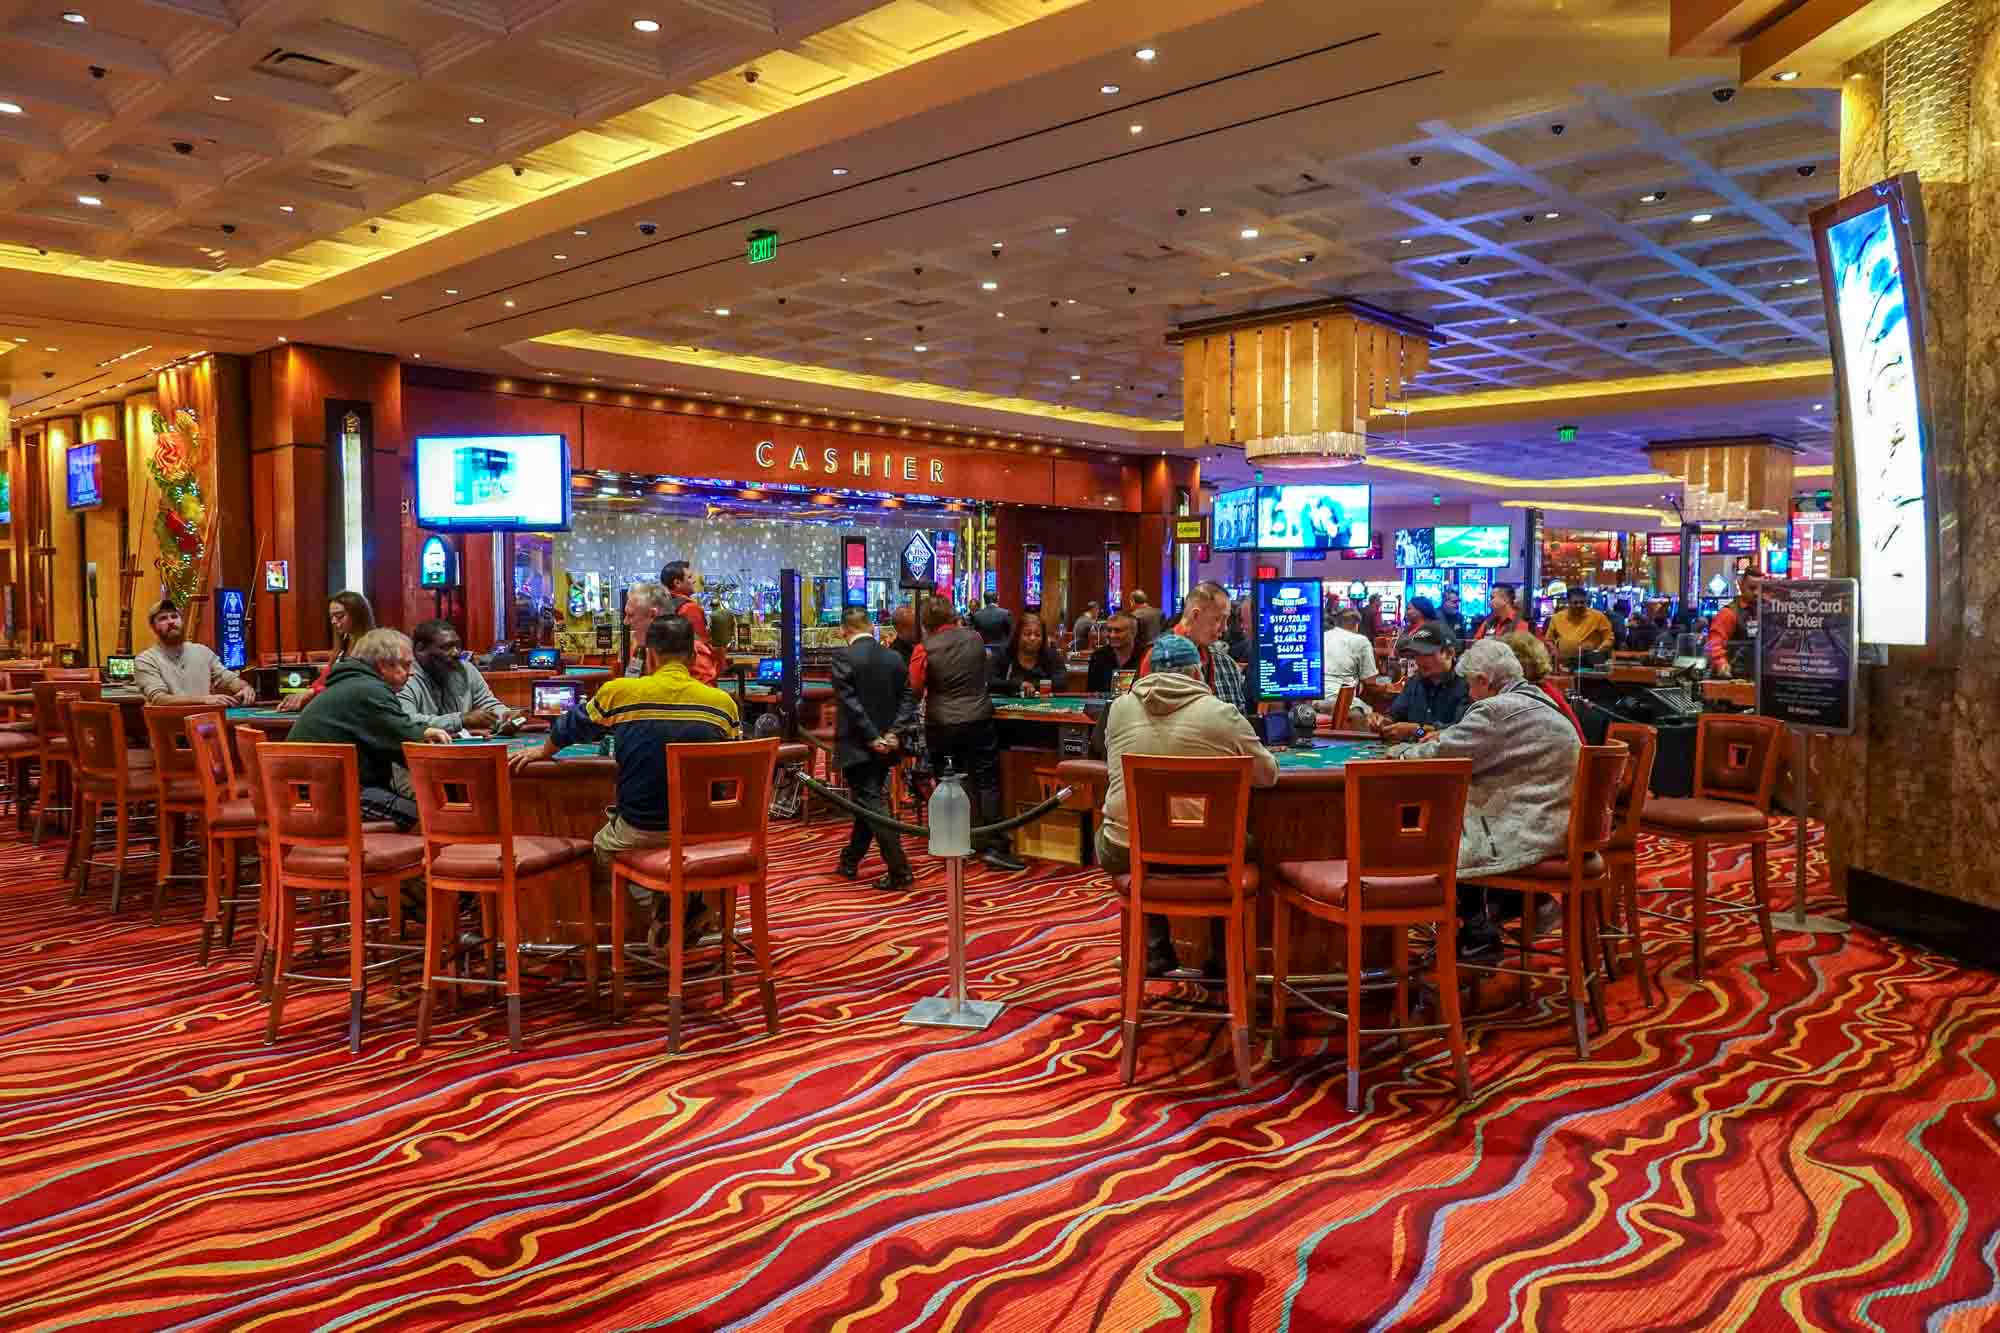 People seated at gaming tables in a casino.